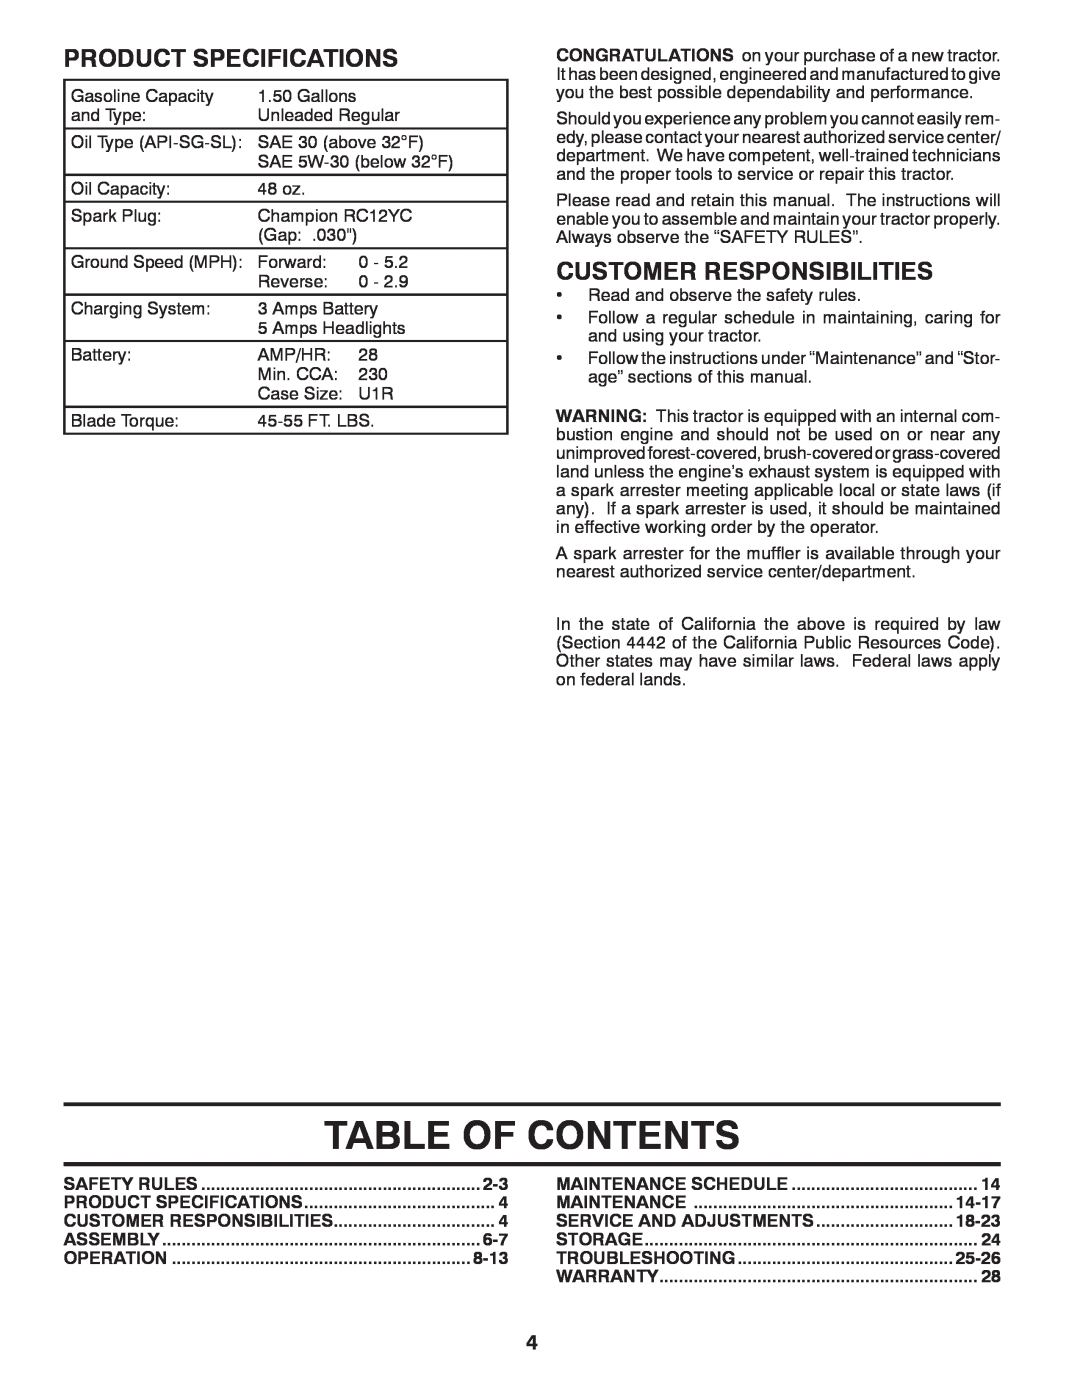 Poulan 435712, 96042007202 manual Table Of Contents, Product Specifications, Customer Responsibilities 